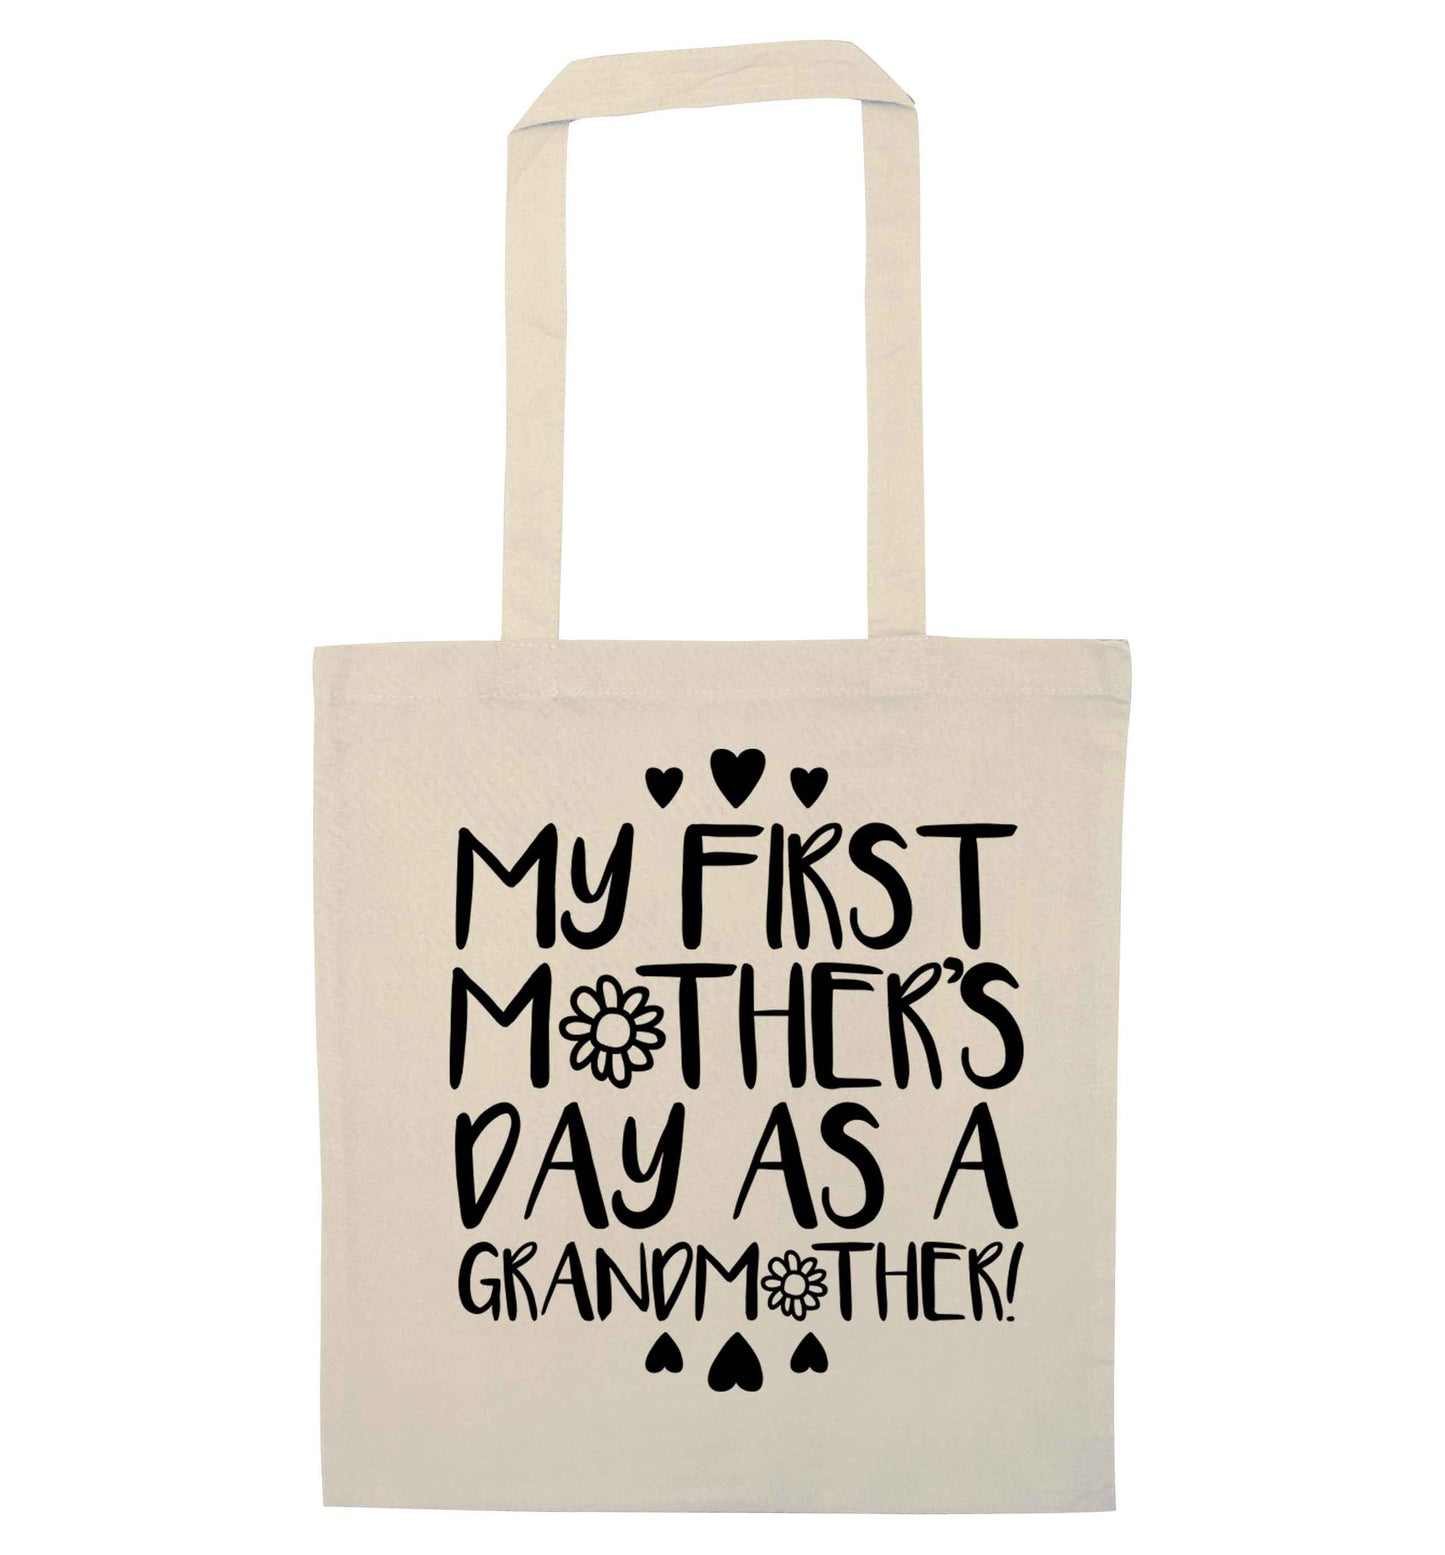 It's my first mother's day as a grandmother natural tote bag